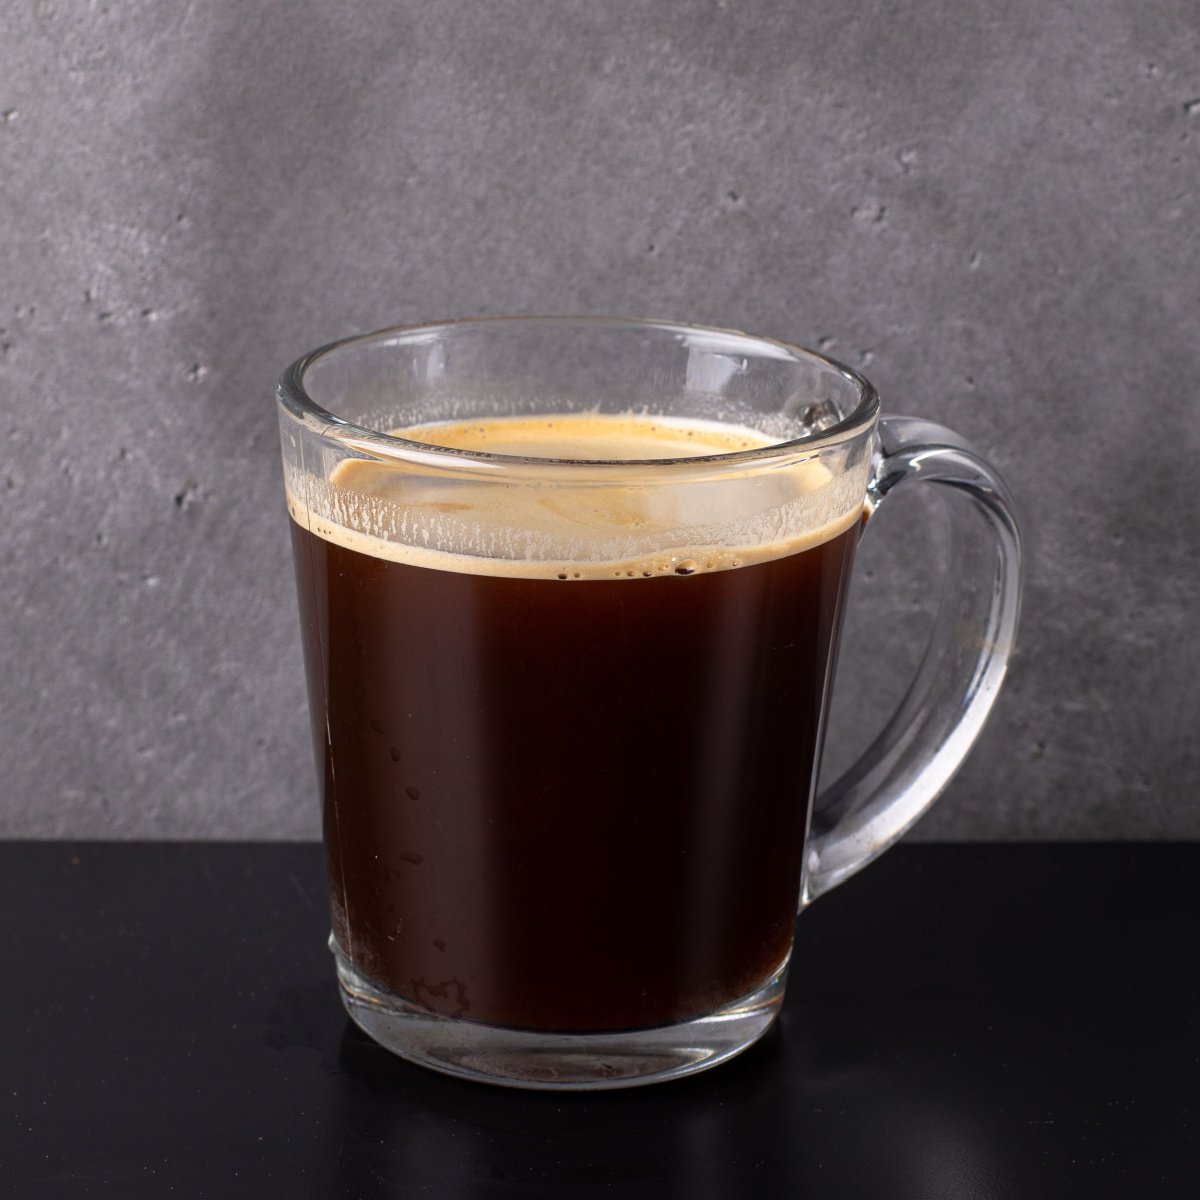 lungo in a glass mug on black table with cement background